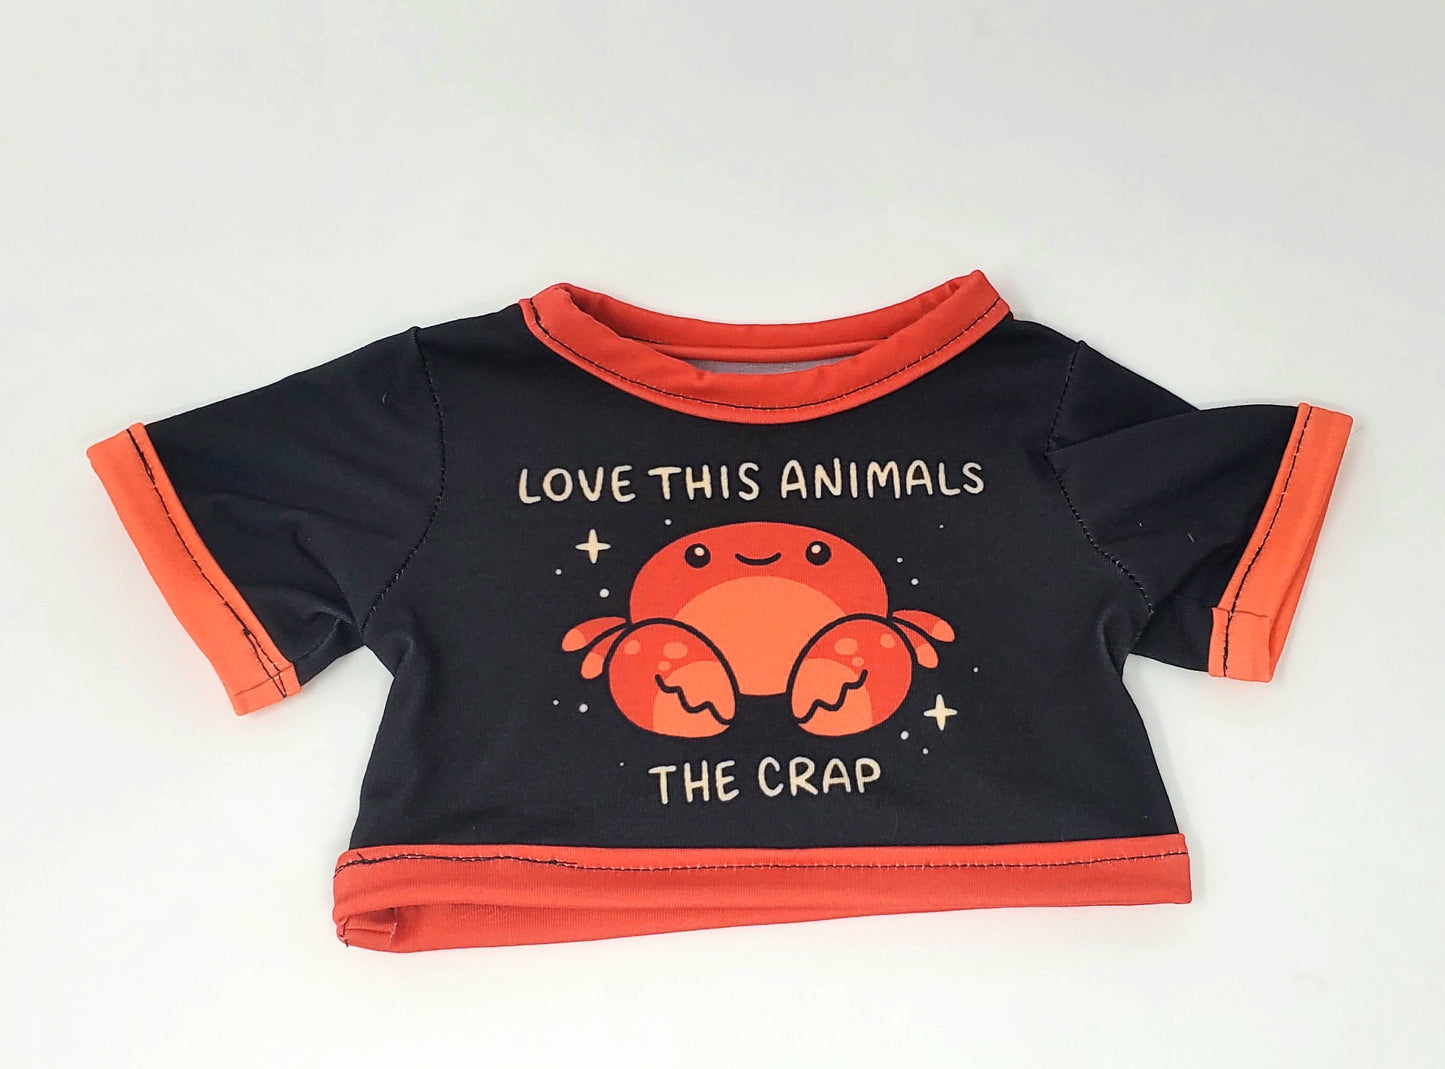 Love this Animals The Crap Shirt for Teddy Plush - Design by ParadoxxPalms